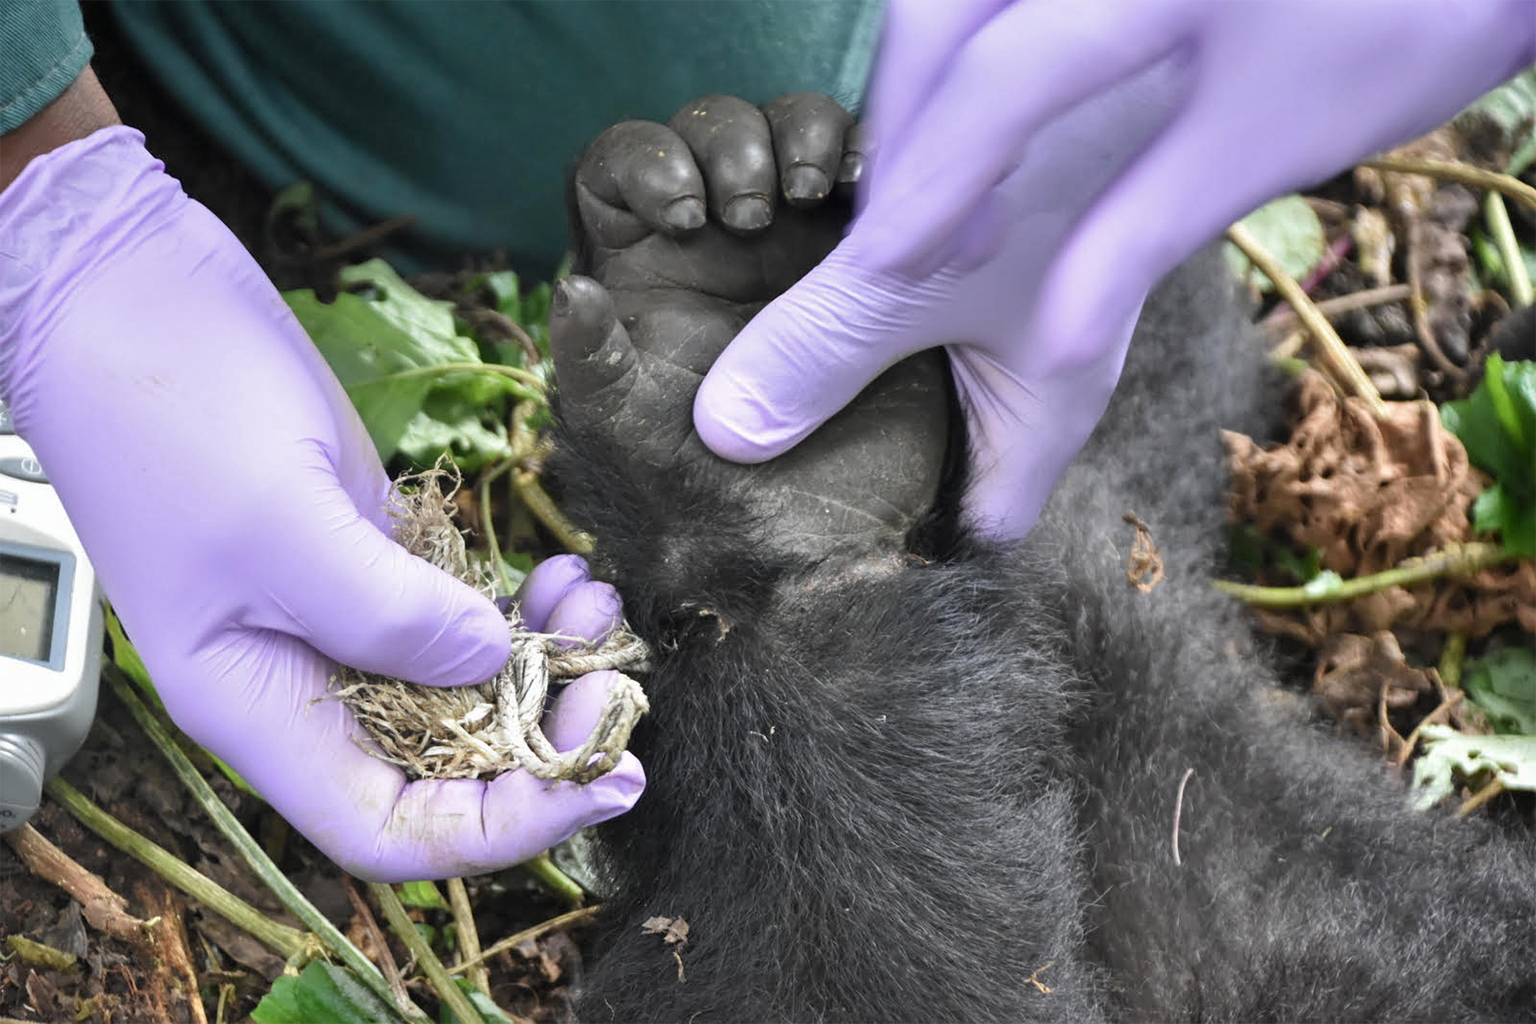 Close up of the hand of Theodore, an infant mountain gorilla